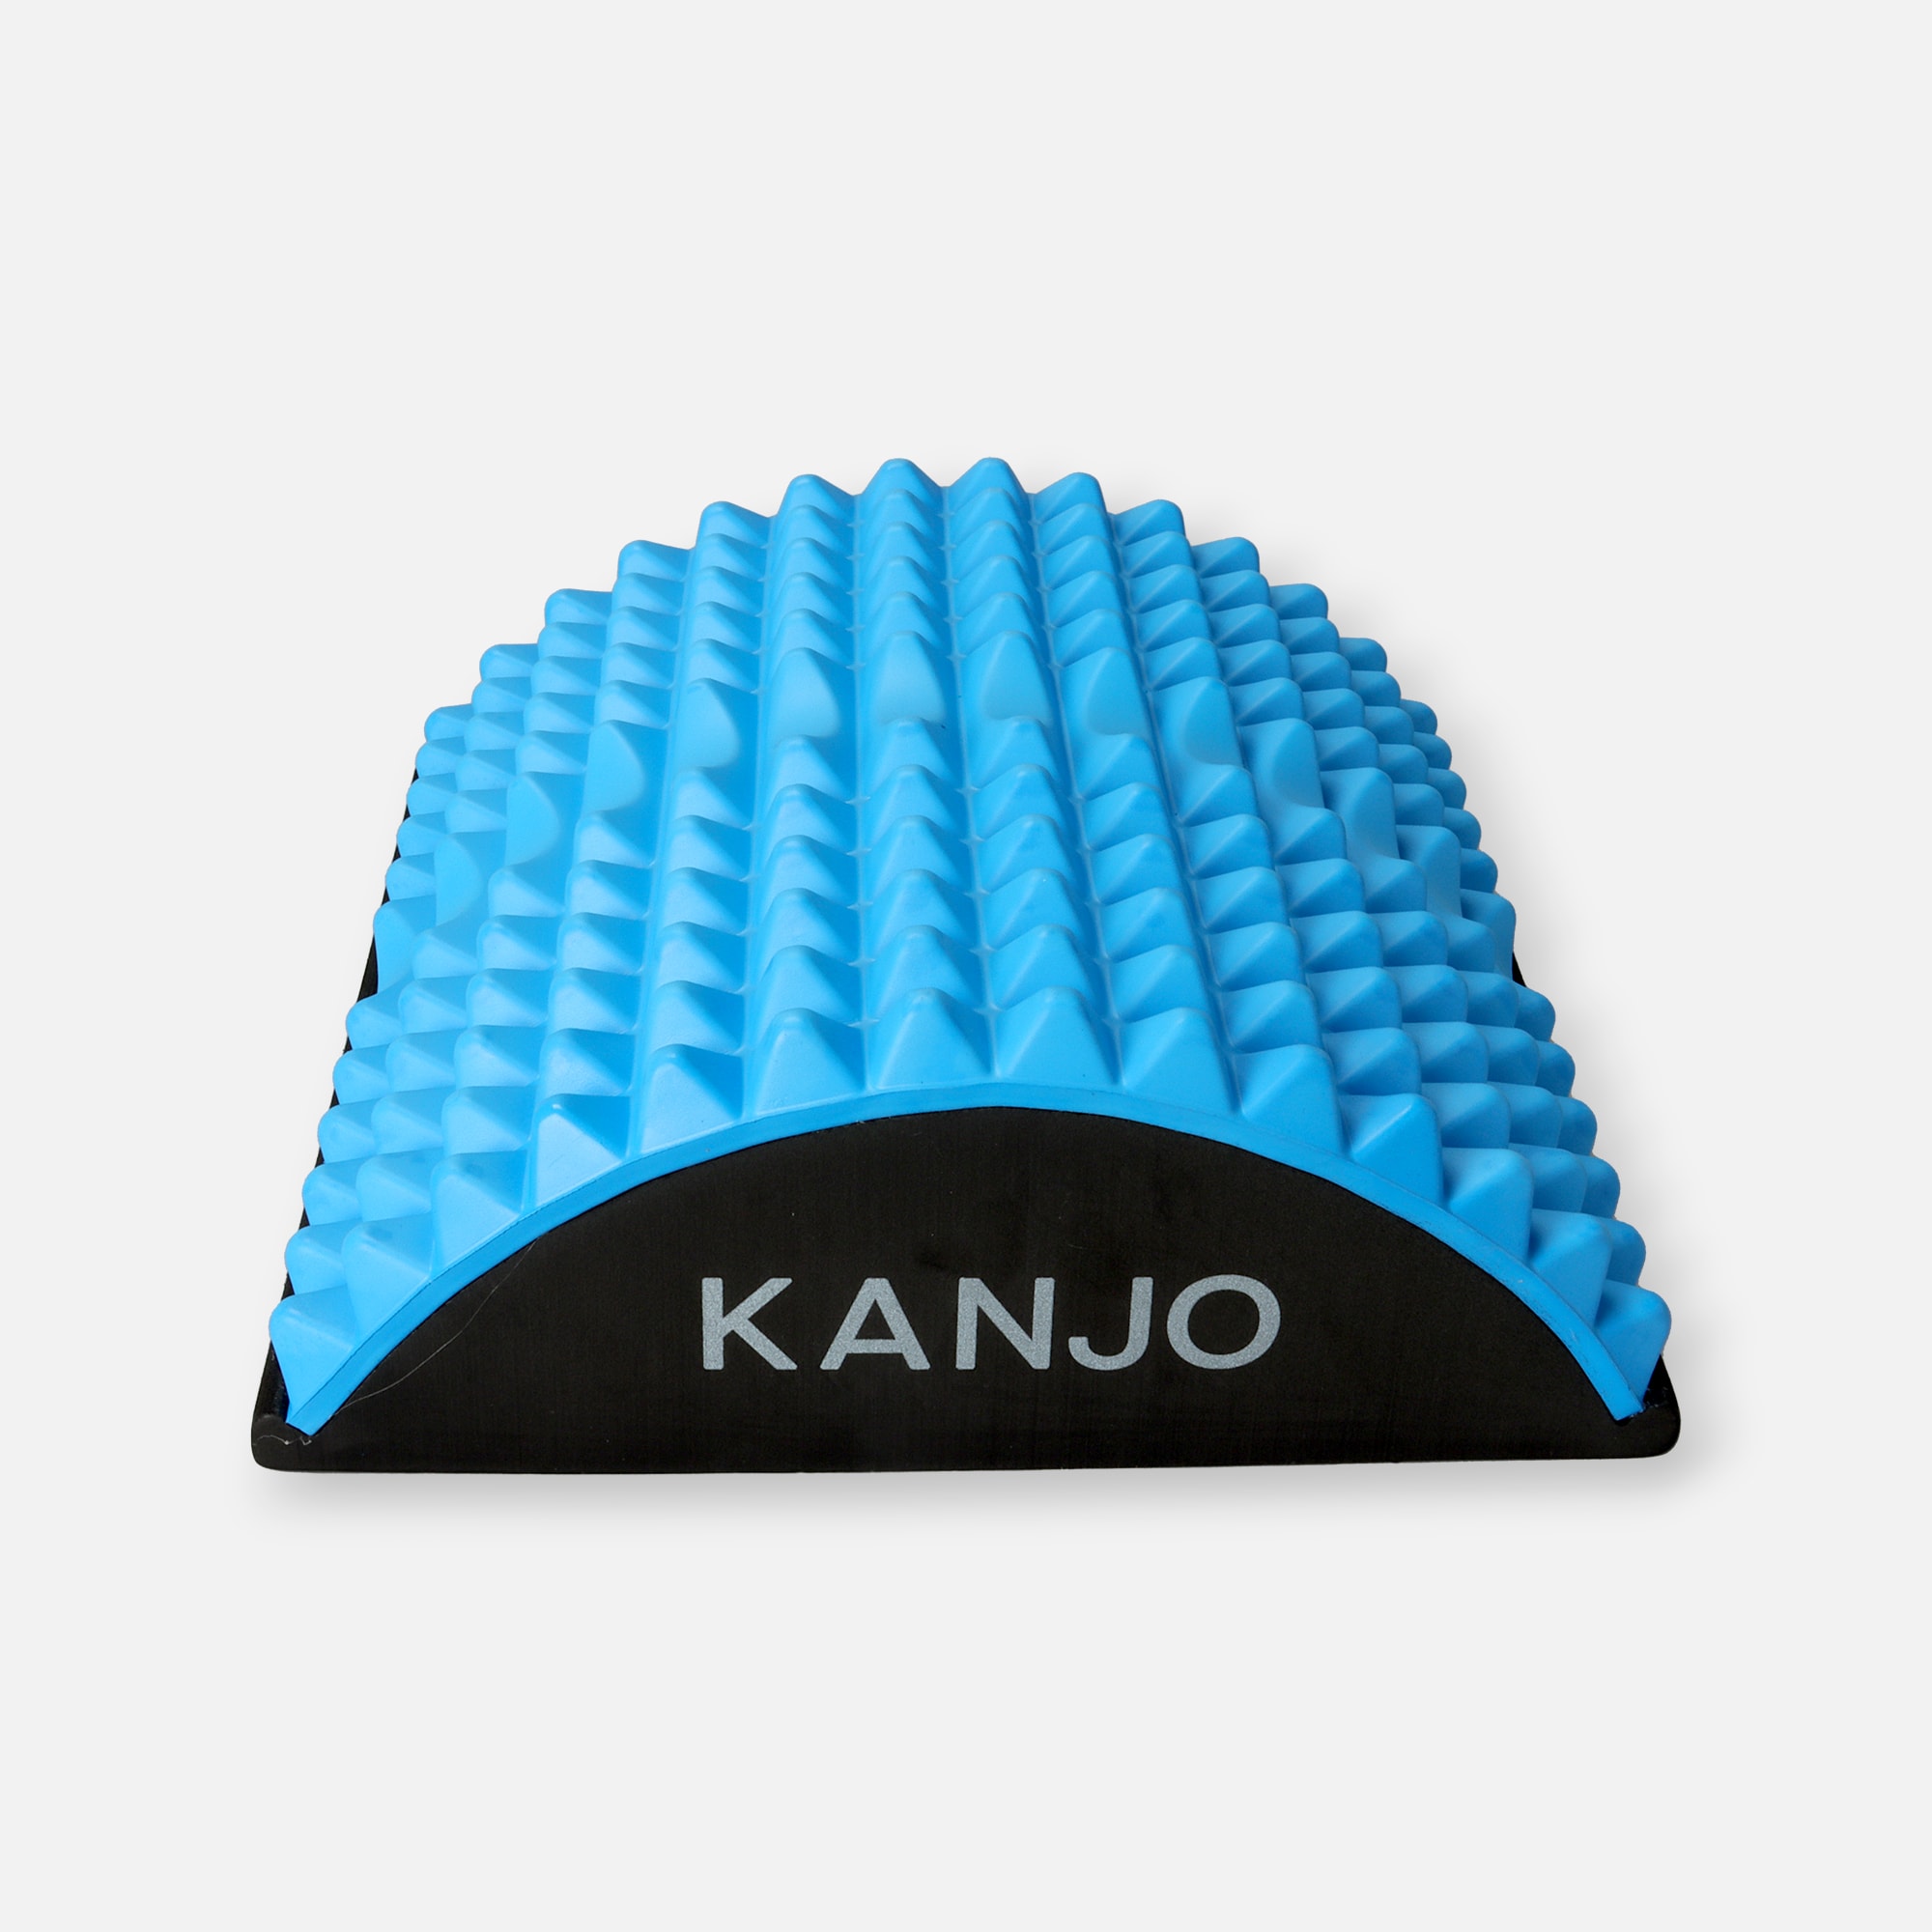 Kanjo FSA HSA Eligible Acupressure Lower Back Pain Relief Cushion  Seat  Cushion for Lower Back Lumbar Support & Back Stretcher for Lower Back Pain  Relief